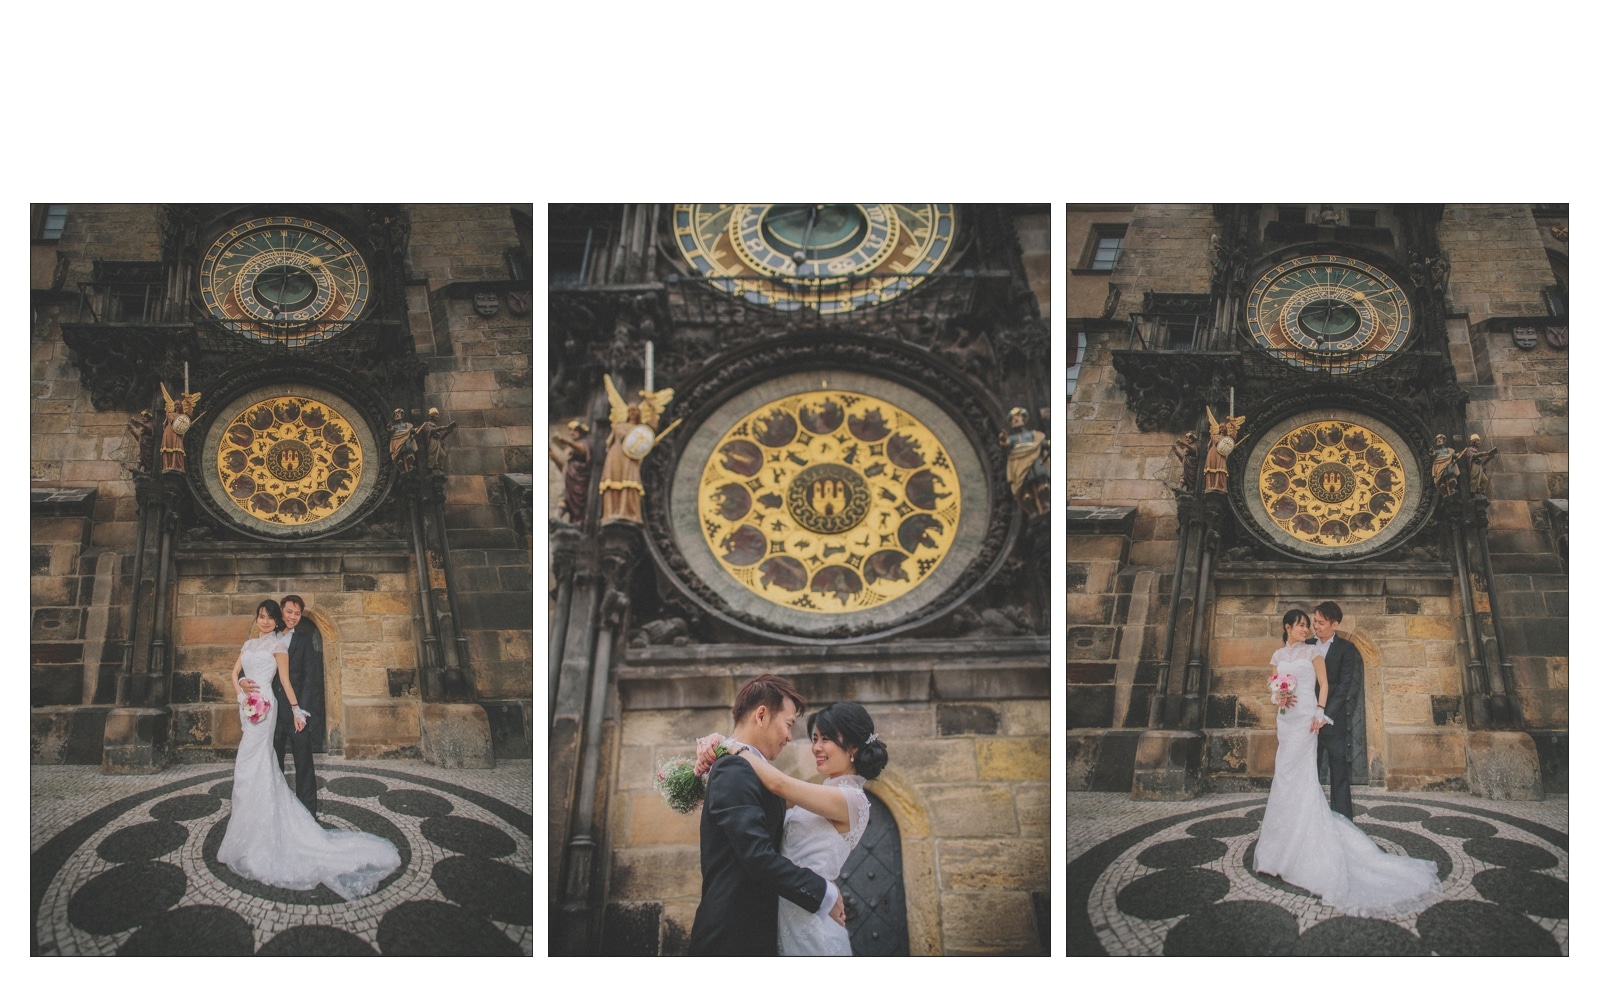 Prague pre wedding / Sharon & Danny Fall portraits session at The Astronomical Clock